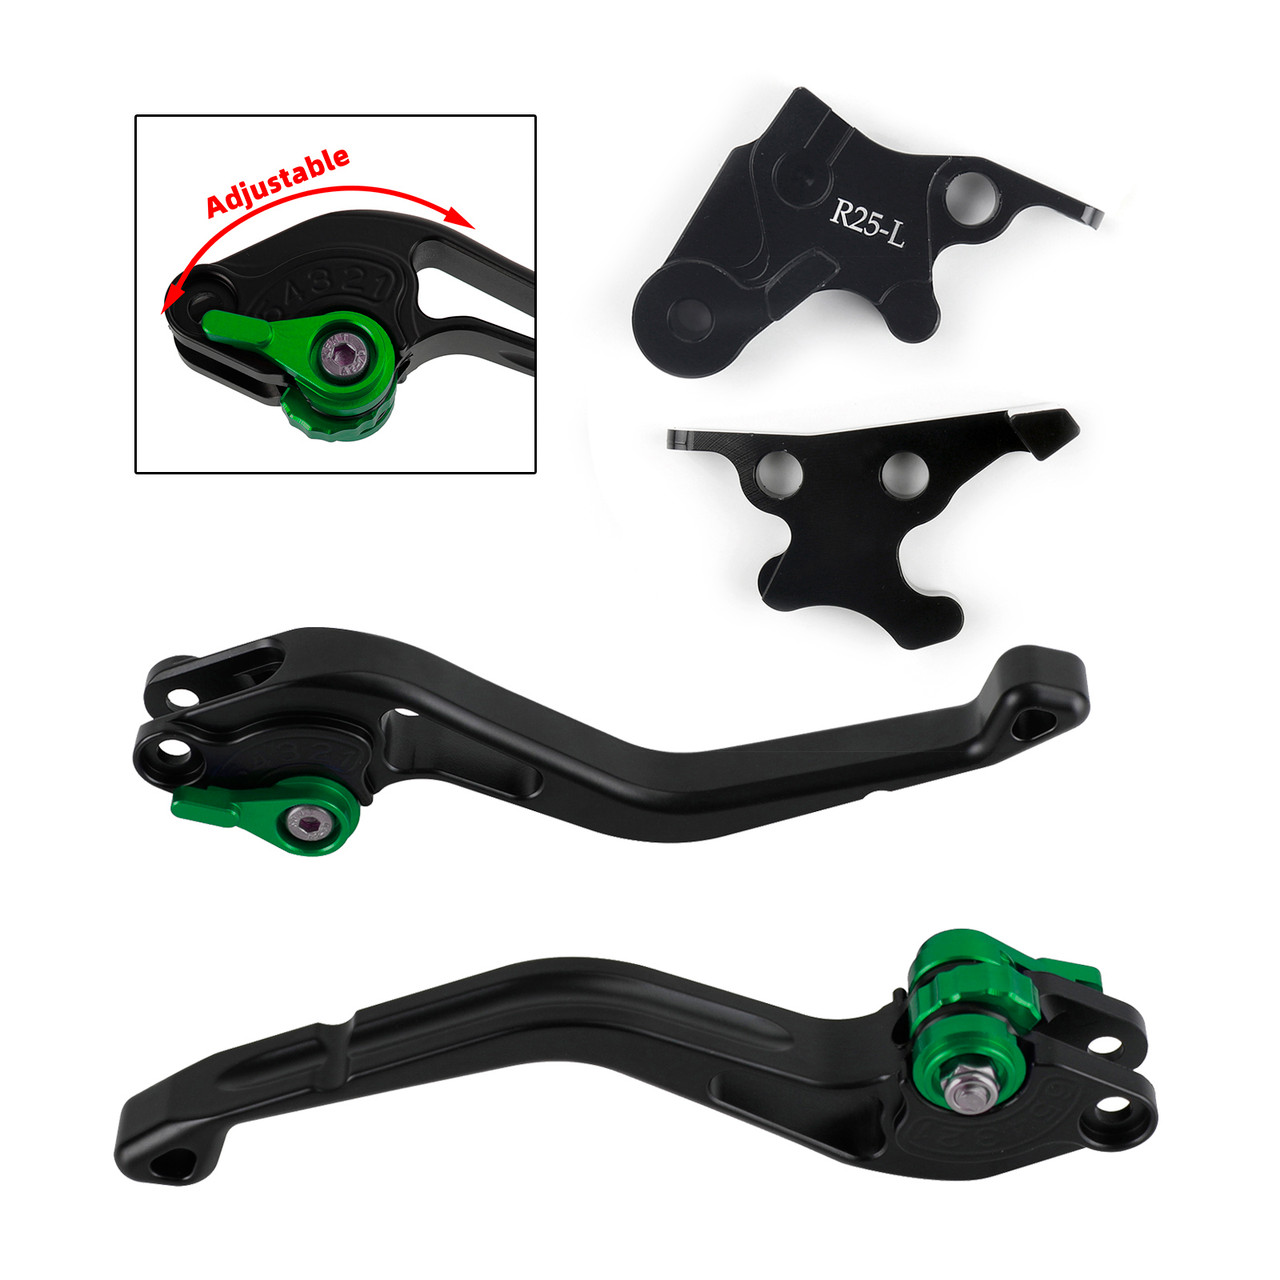 Short Clutch Brake Lever fit for Yamaha YZF R25 2014-2015 YZF R3 2015